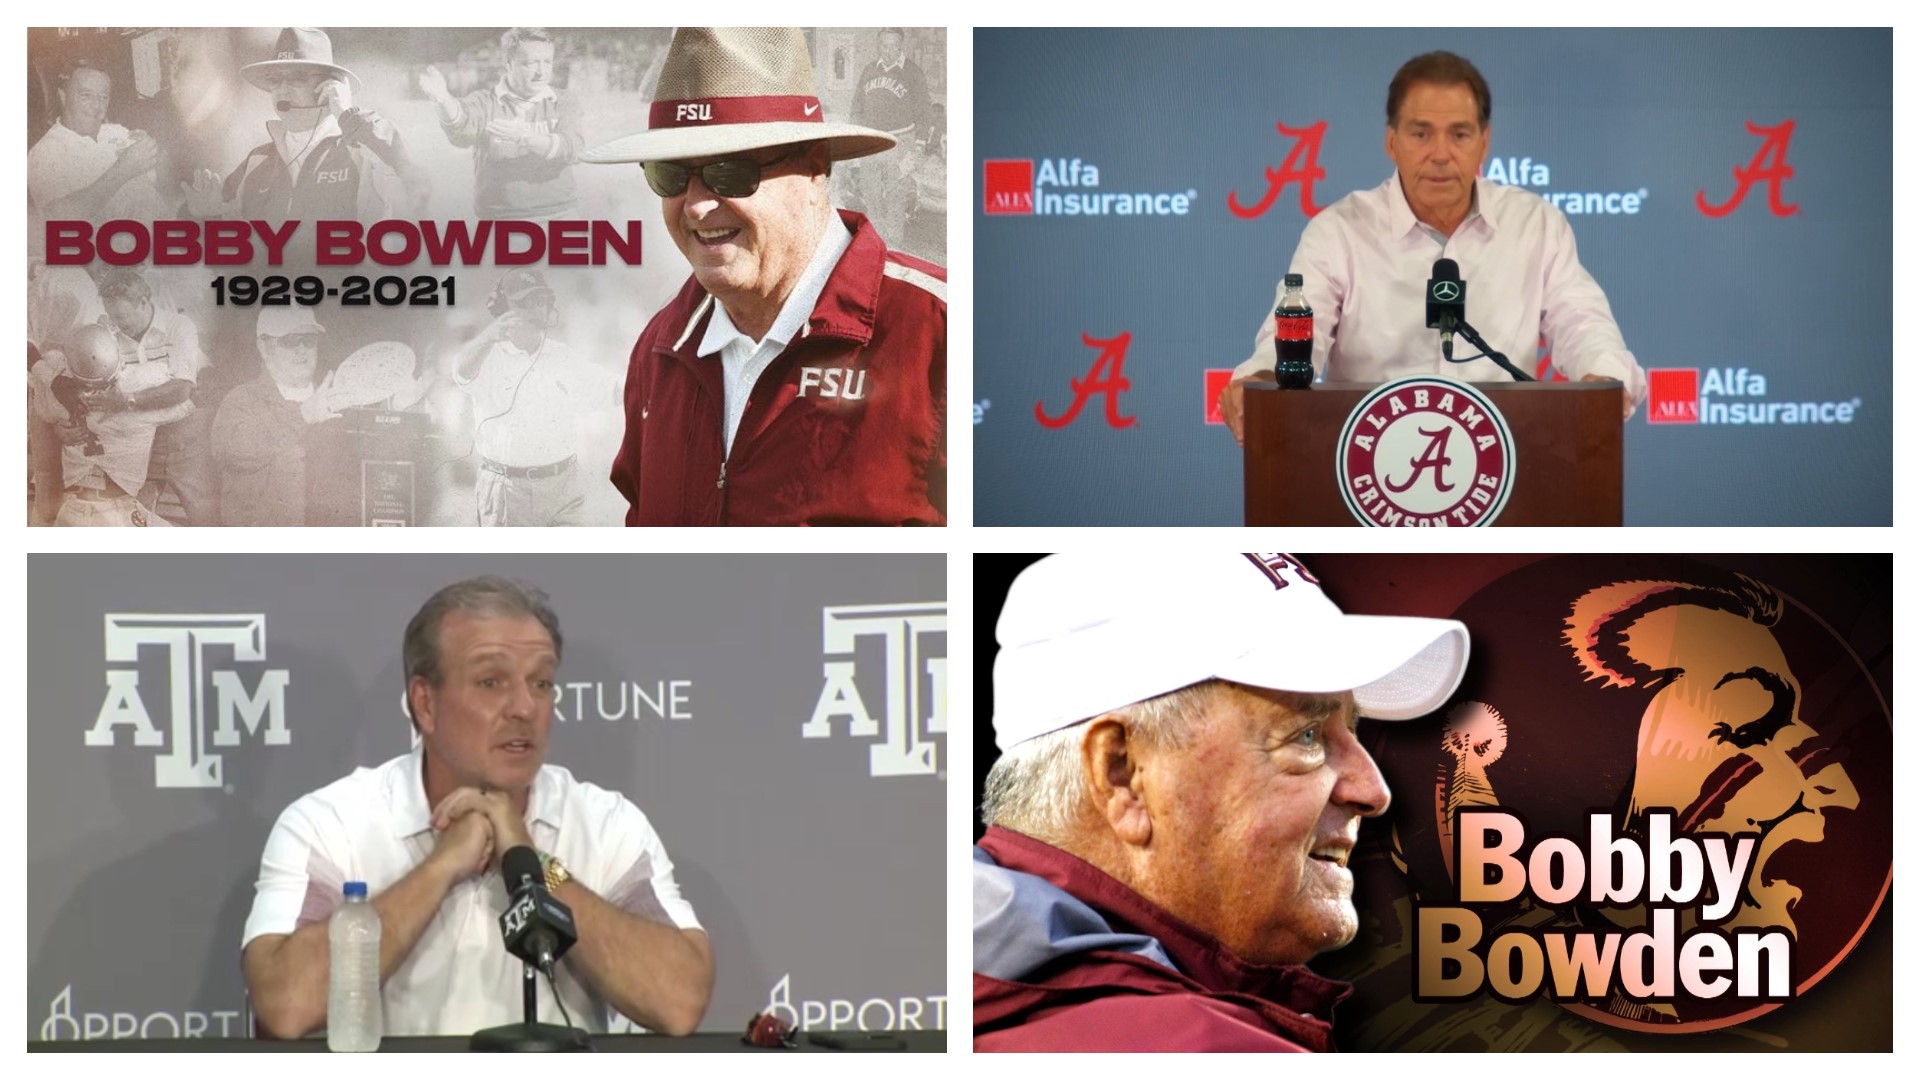 Hall of Fame college football coach Bobby Bowden has died after a battle with pancreatic cancer. Nick Saban & Jimbo Fisher were both close to Coach Bowden.